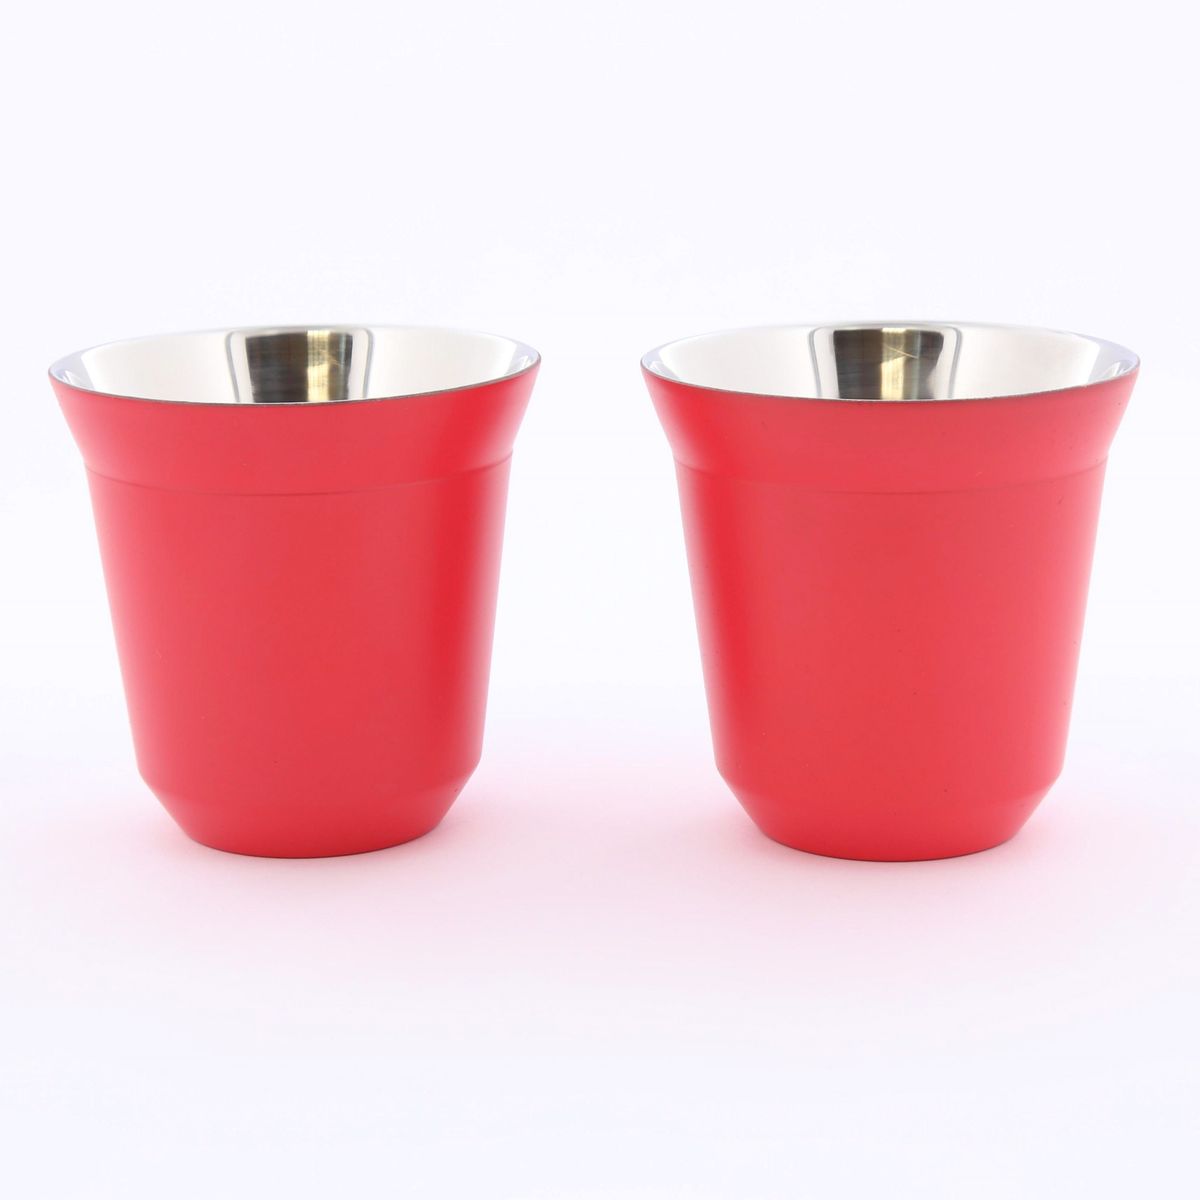 Rovatti Pola Red Stainless Steel Cup 85ml